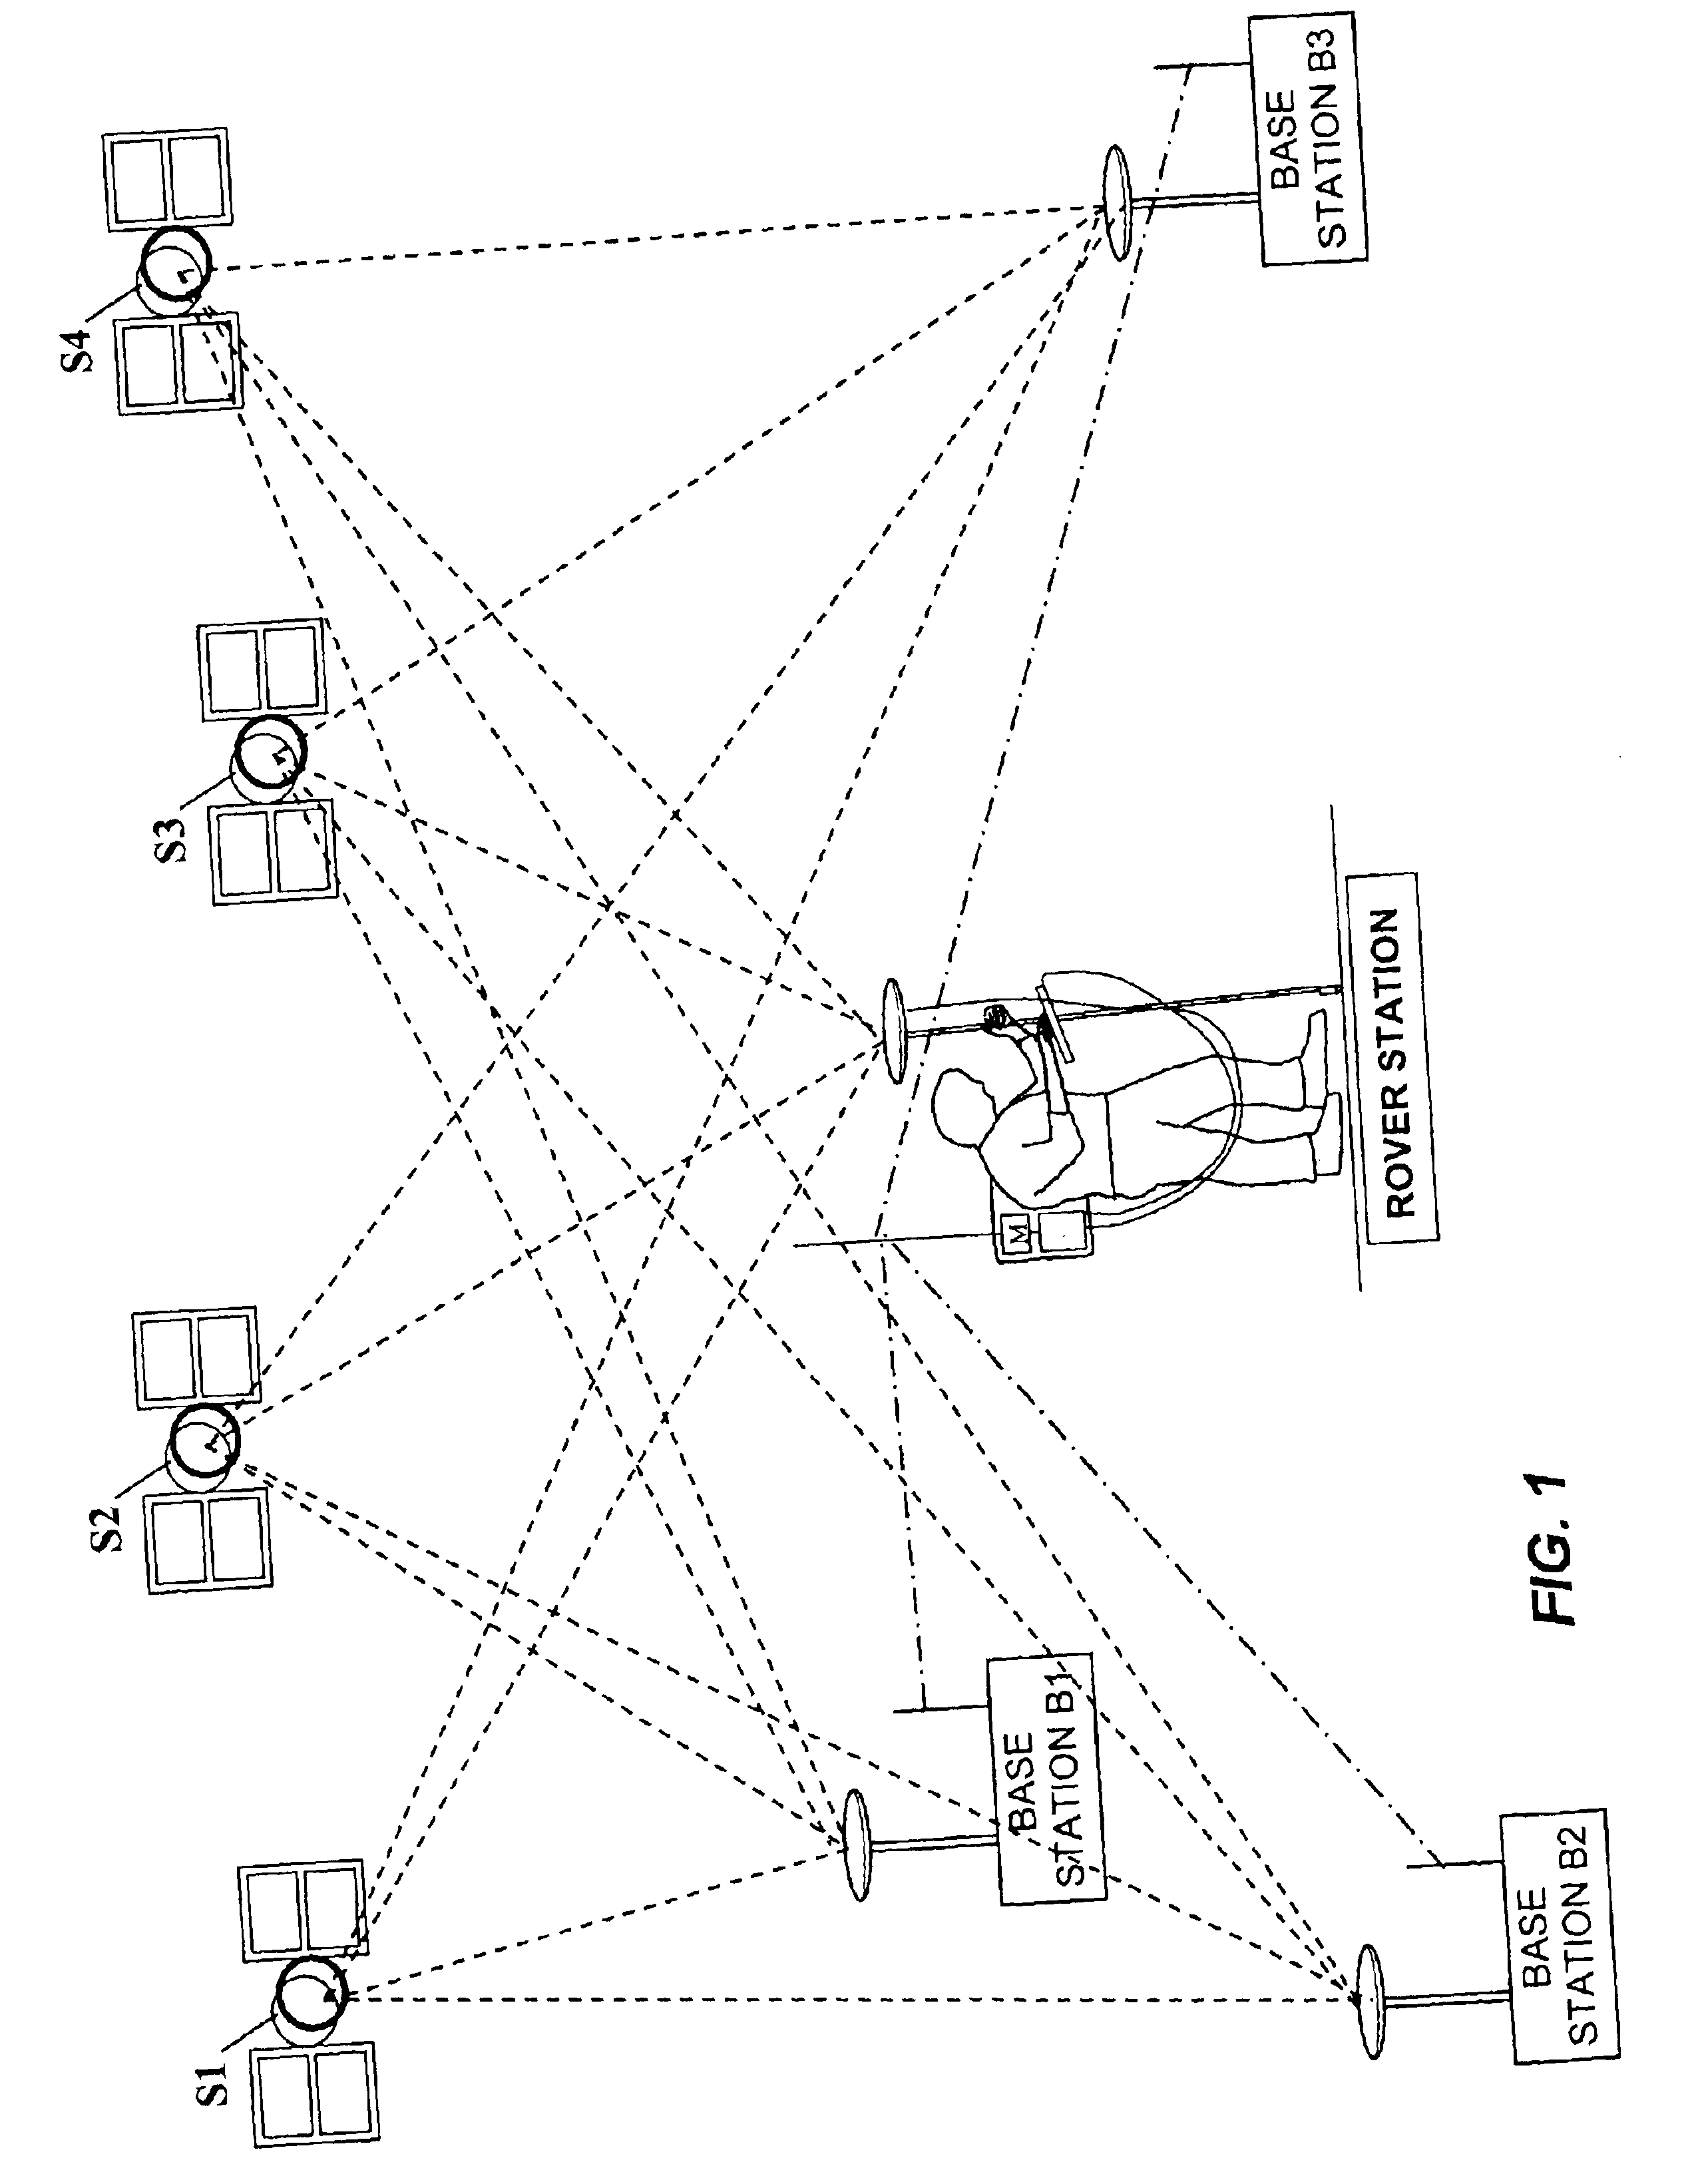 Position estimation using a network of a global-positioning receivers